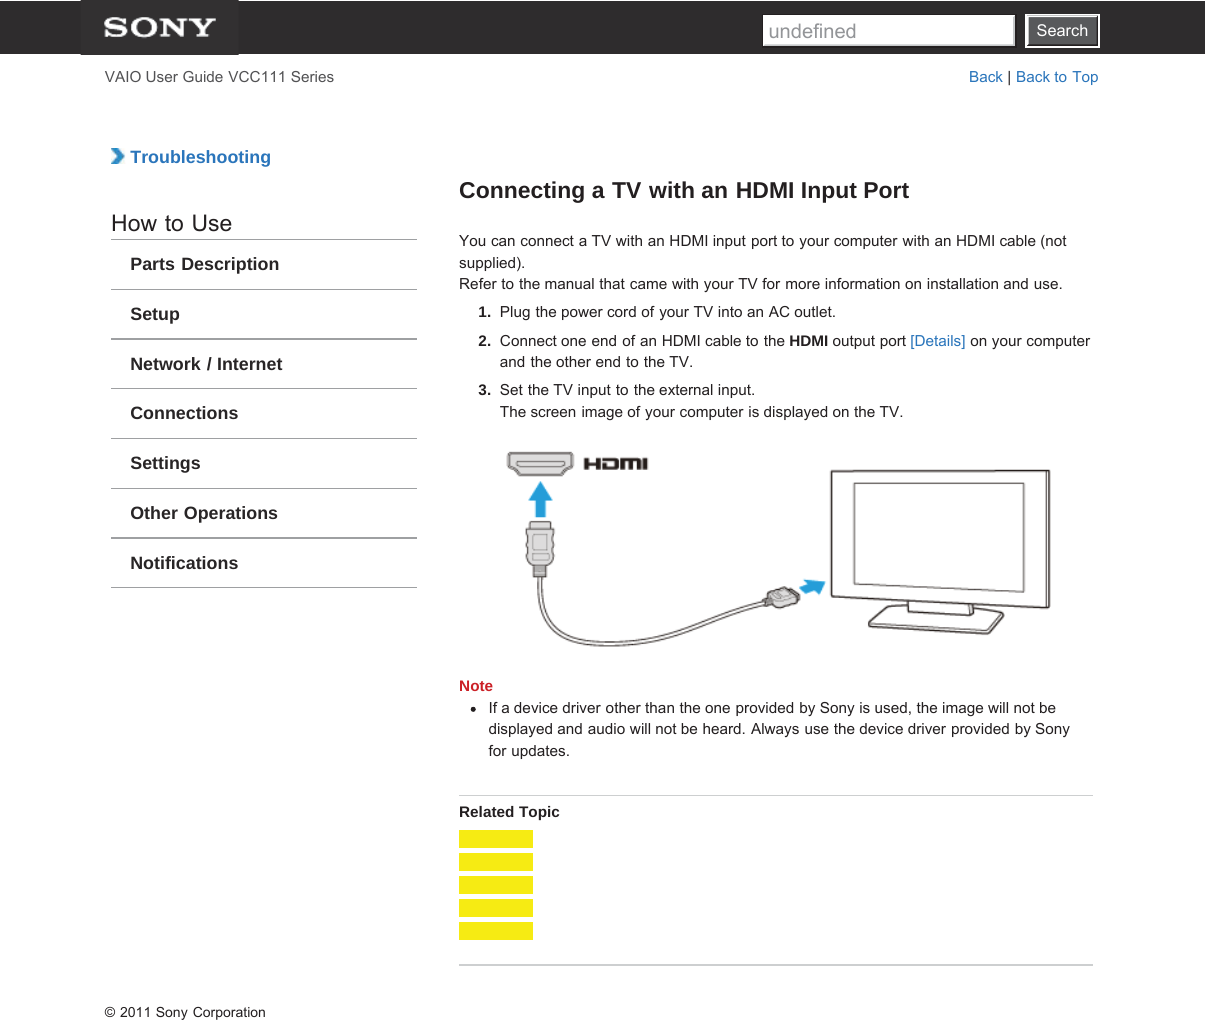 SearchVAIO User Guide VCC111 Series Back | Back to Top TroubleshootingHow to UseParts DescriptionSetupNetwork / InternetConnectionsSettingsOther OperationsNotificationsConnecting a TV with an HDMI Input PortYou can connect a TV with an HDMI input port to your computer with an HDMI cable (notsupplied).Refer to the manual that came with your TV for more information on installation and use.1.  Plug the power cord of your TV into an AC outlet.2.  Connect one end of an HDMI cable to the HDMI output port [Details] on your computerand the other end to the TV.3.  Set the TV input to the external input.The screen image of your computer is displayed on the TV.NoteIf a device driver other than the one provided by Sony is used, the image will not bedisplayed and audio will not be heard. Always use the device driver provided by Sonyfor updates.Related Topic© 2011 Sony CorporationSearchundefined